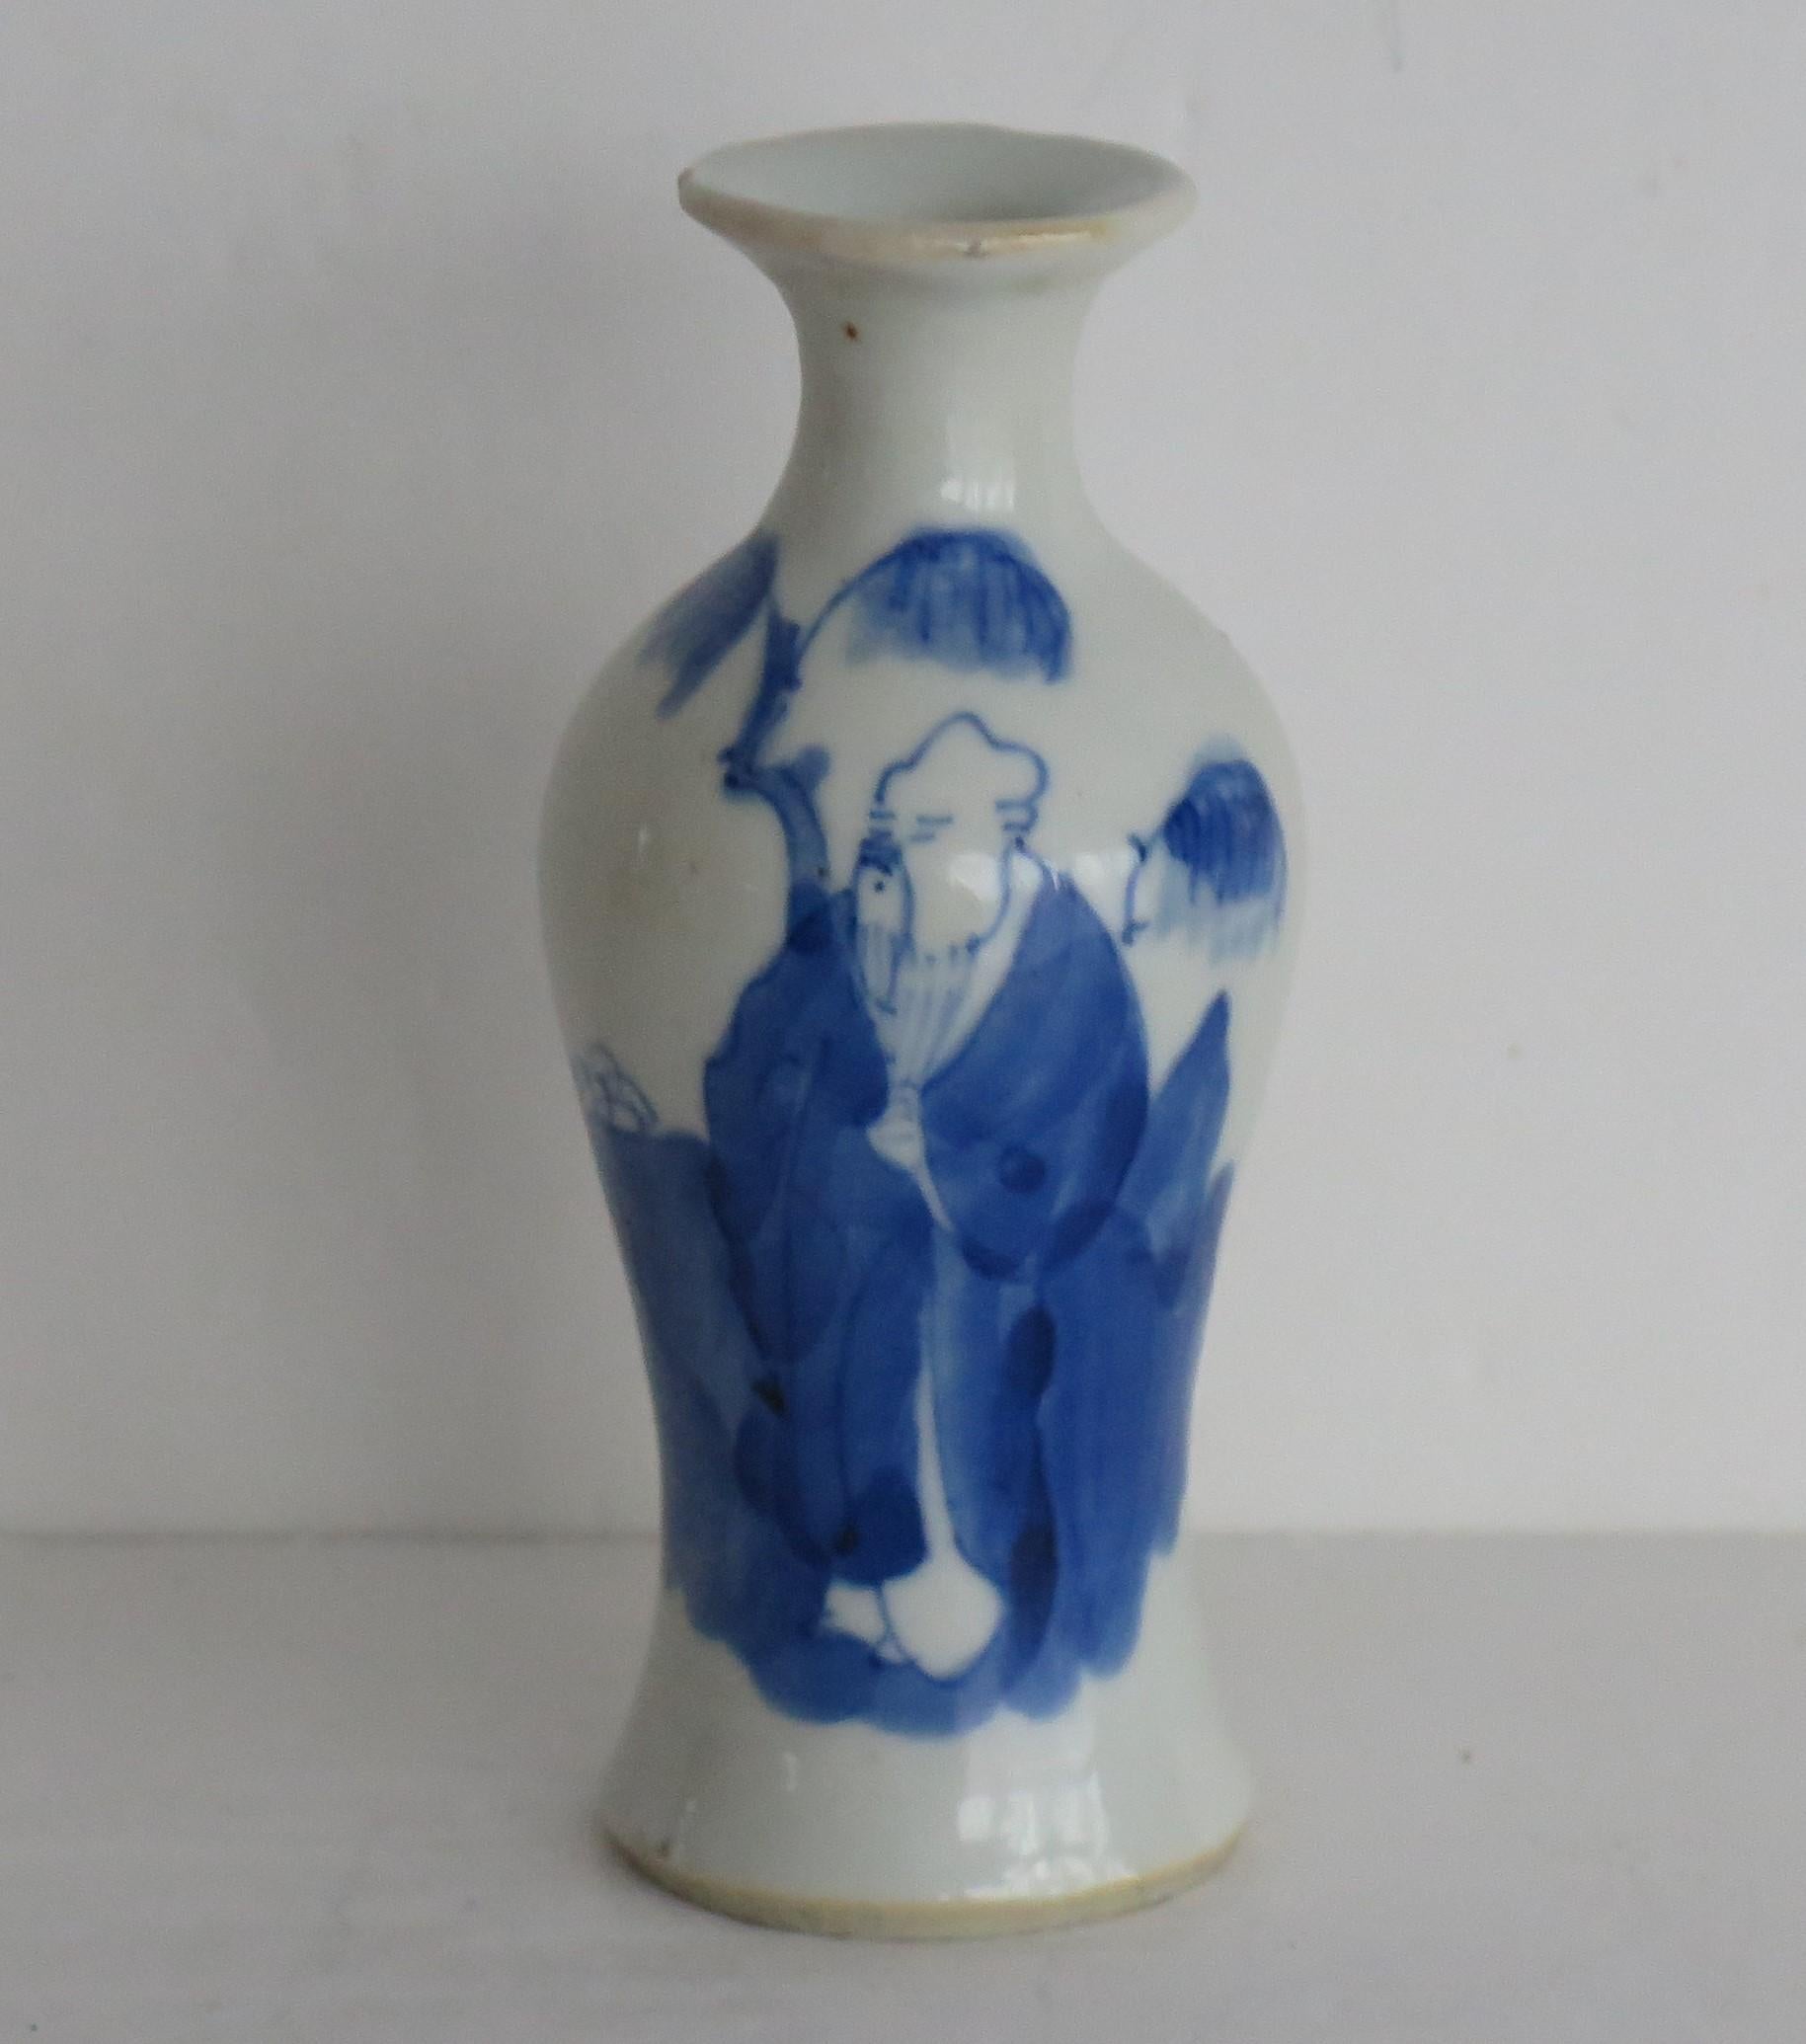 This is a hand painted 17th century, late Ming dynasty, porcelain Jar or small Vase which we attribute to the Hatcher shipwreck cargo, this piece being from the Wanli /transitional period, circa 1625- 1640. 

The Jar/ Vase is fairly thickly potted